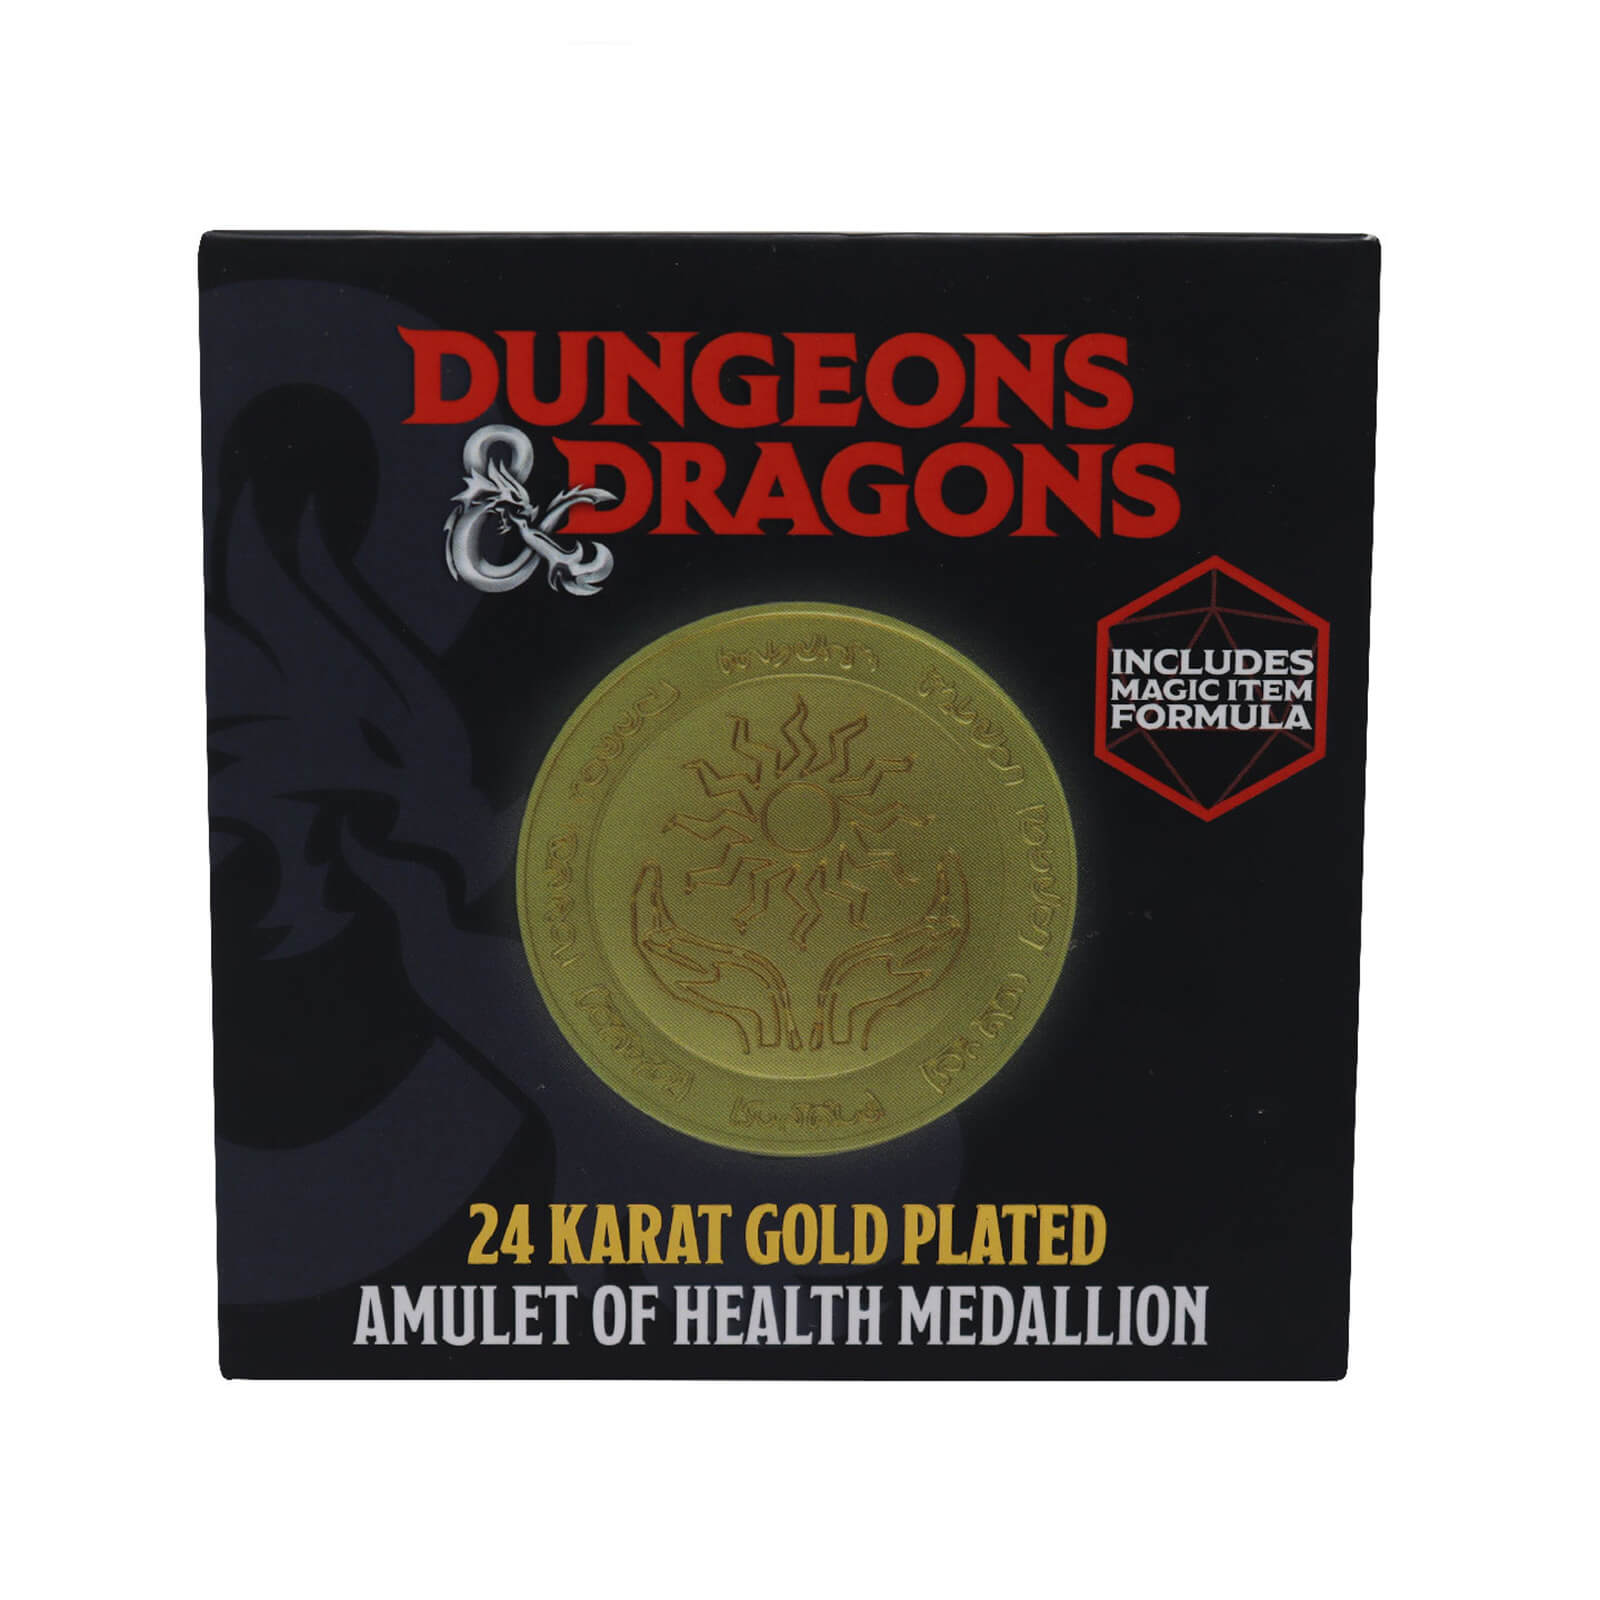 Image of Fanattik Dungeons & Dragons Limited Edition 24k Gold Plated Medallion